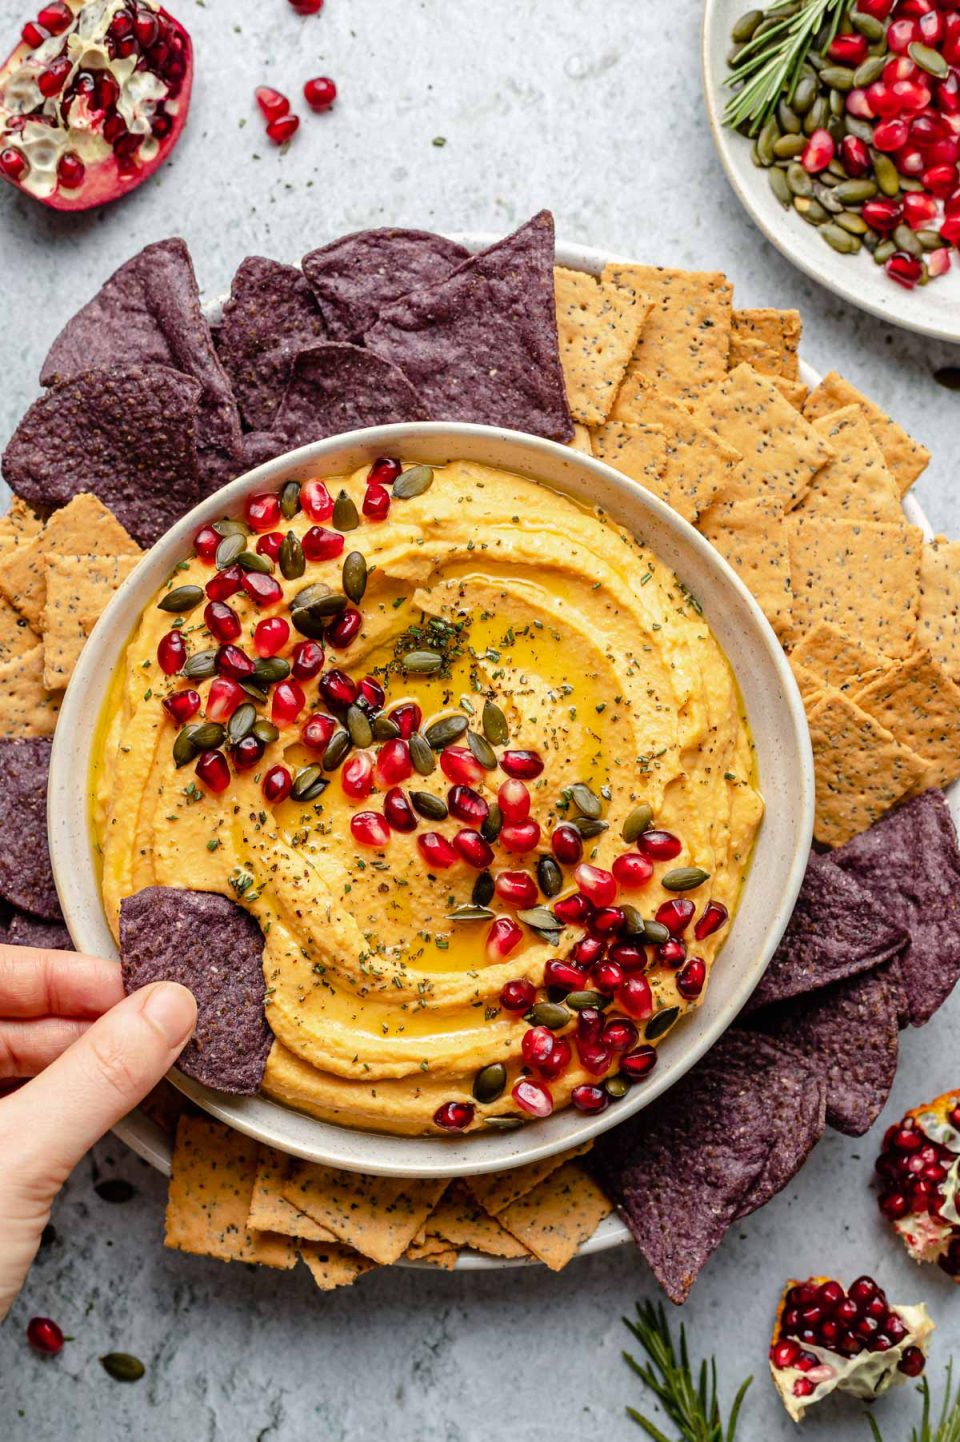 Overhead image of a hand dipping a blue corn tortilla chip into a bowl of butternut squash hummus. The hummus is in a white bowl topped with pumpkin seeds, pomegranate arils, and herbs. There are chips and crackers surrounding the bowl of hummus. There are sections of pomegranates in the corners of the image for garnish.